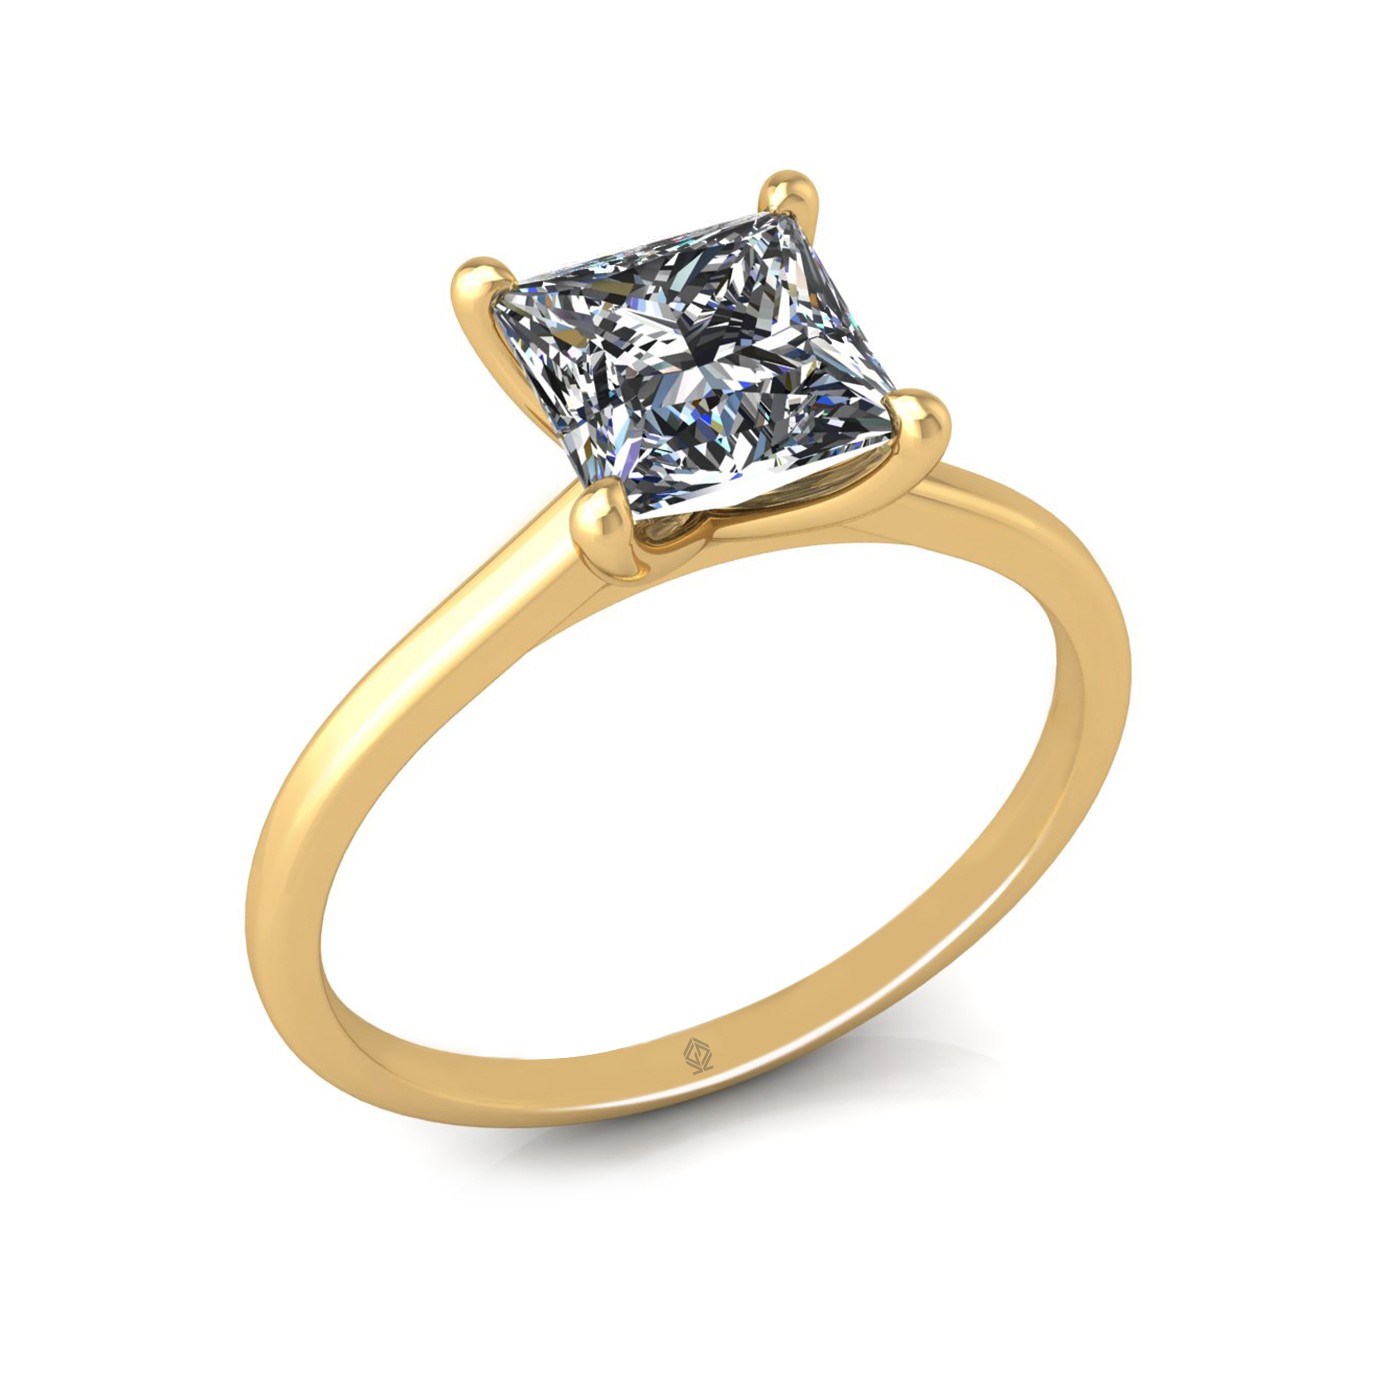 18k yellow gold  1,50 ct 4 prongs solitaire princess cut diamond engagement ring with whisper thin band